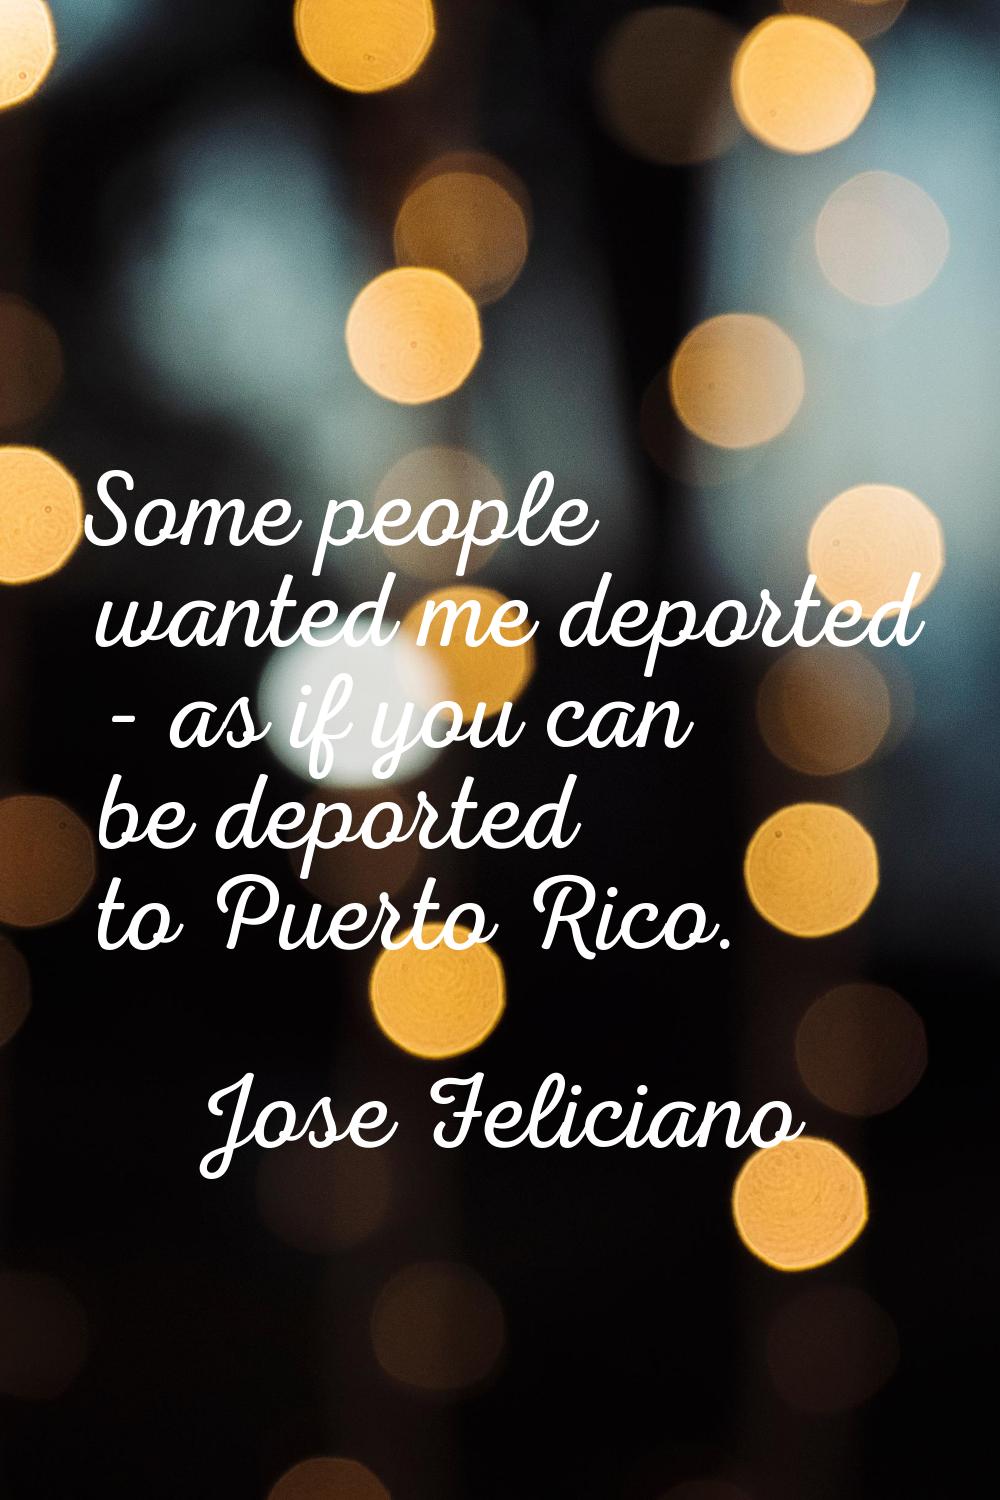 Some people wanted me deported - as if you can be deported to Puerto Rico.